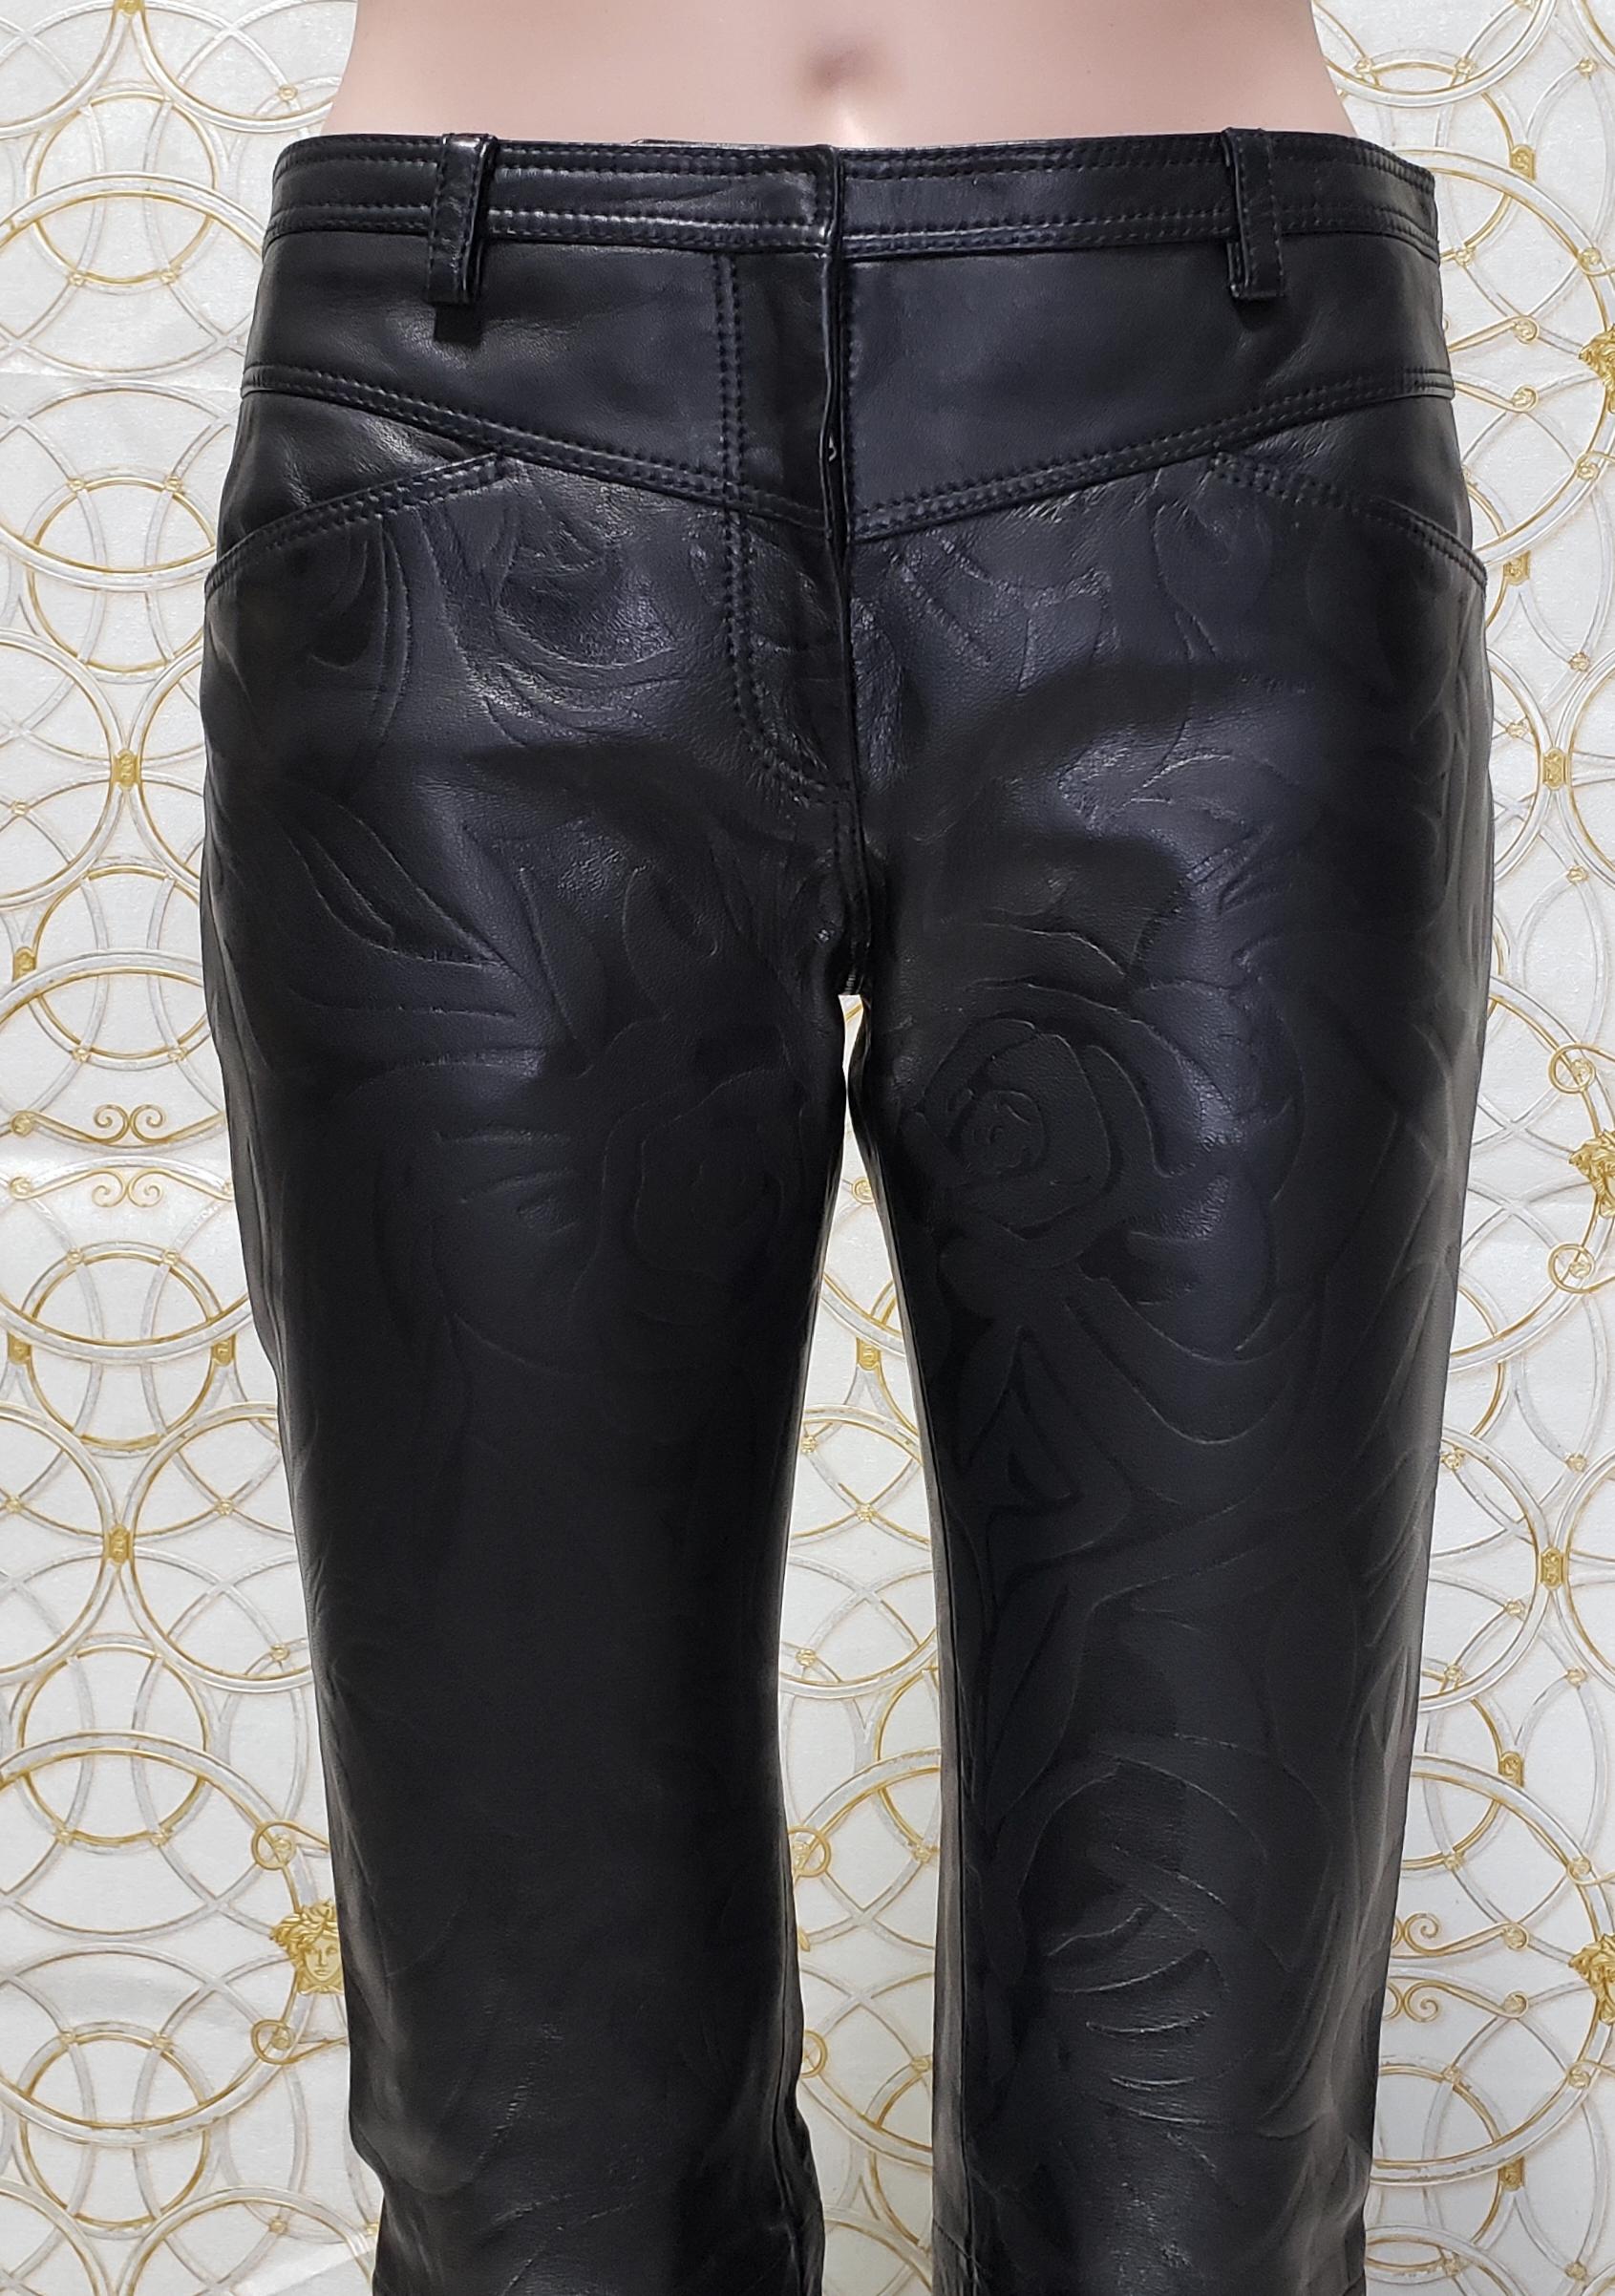 S/S 2014 Look # 35 VERSACE BLACK LEATHER FLORAL PRINT PANTS size 38 - 2 For Sale 2